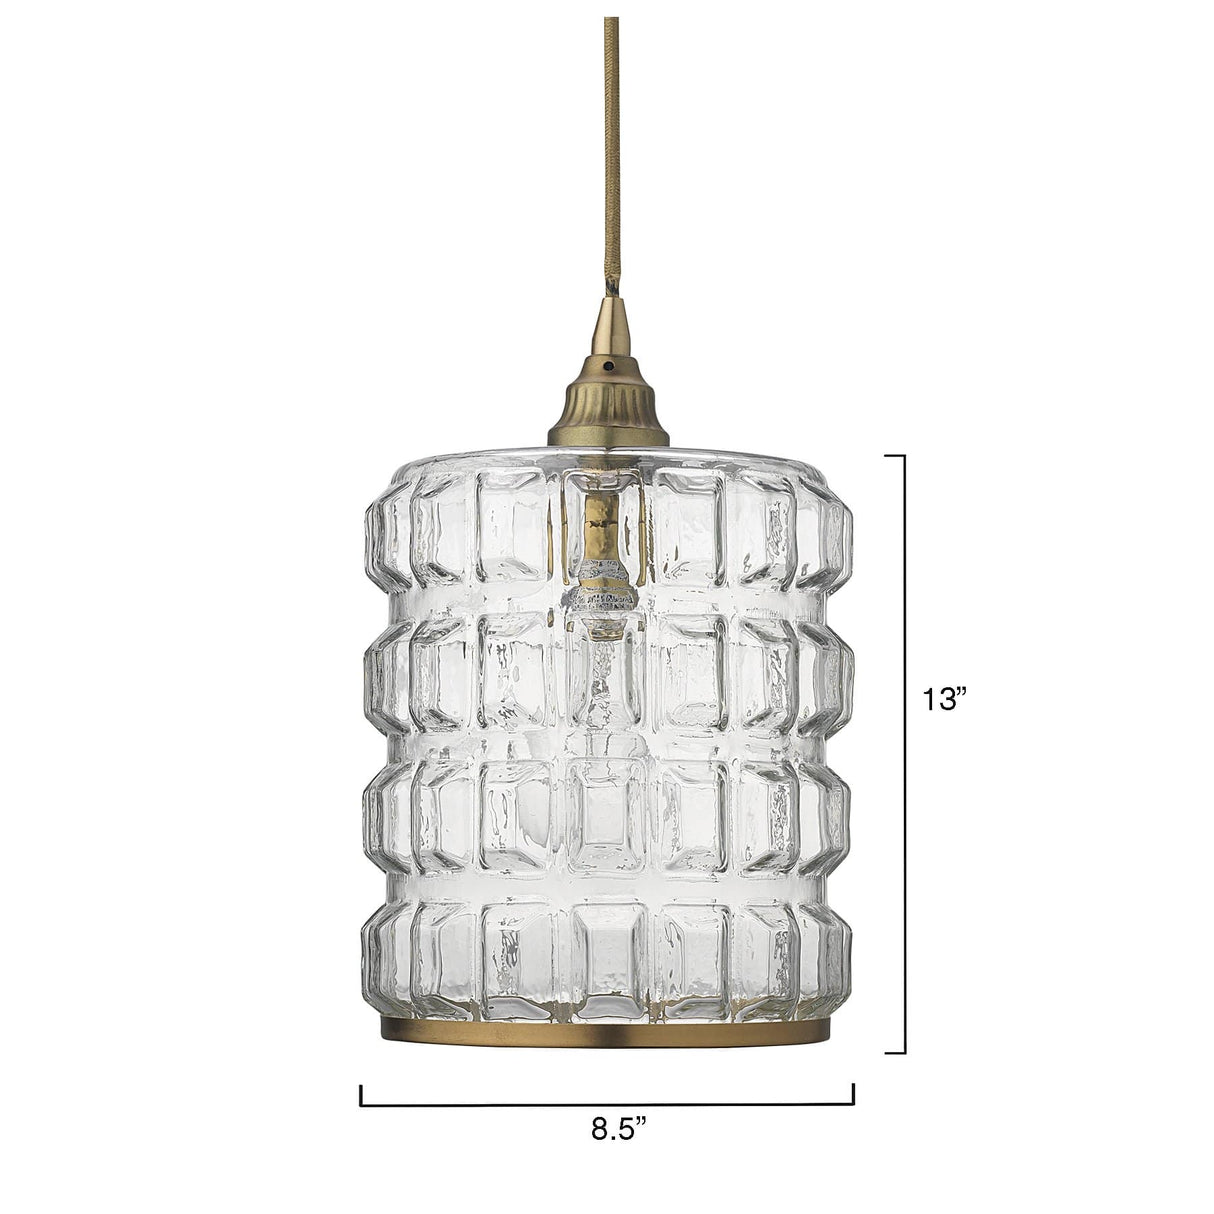 Jamie Young Co. Madison Pendant - Brass Lighting Jamie-Young-5MADI-CLAB 00688933018899